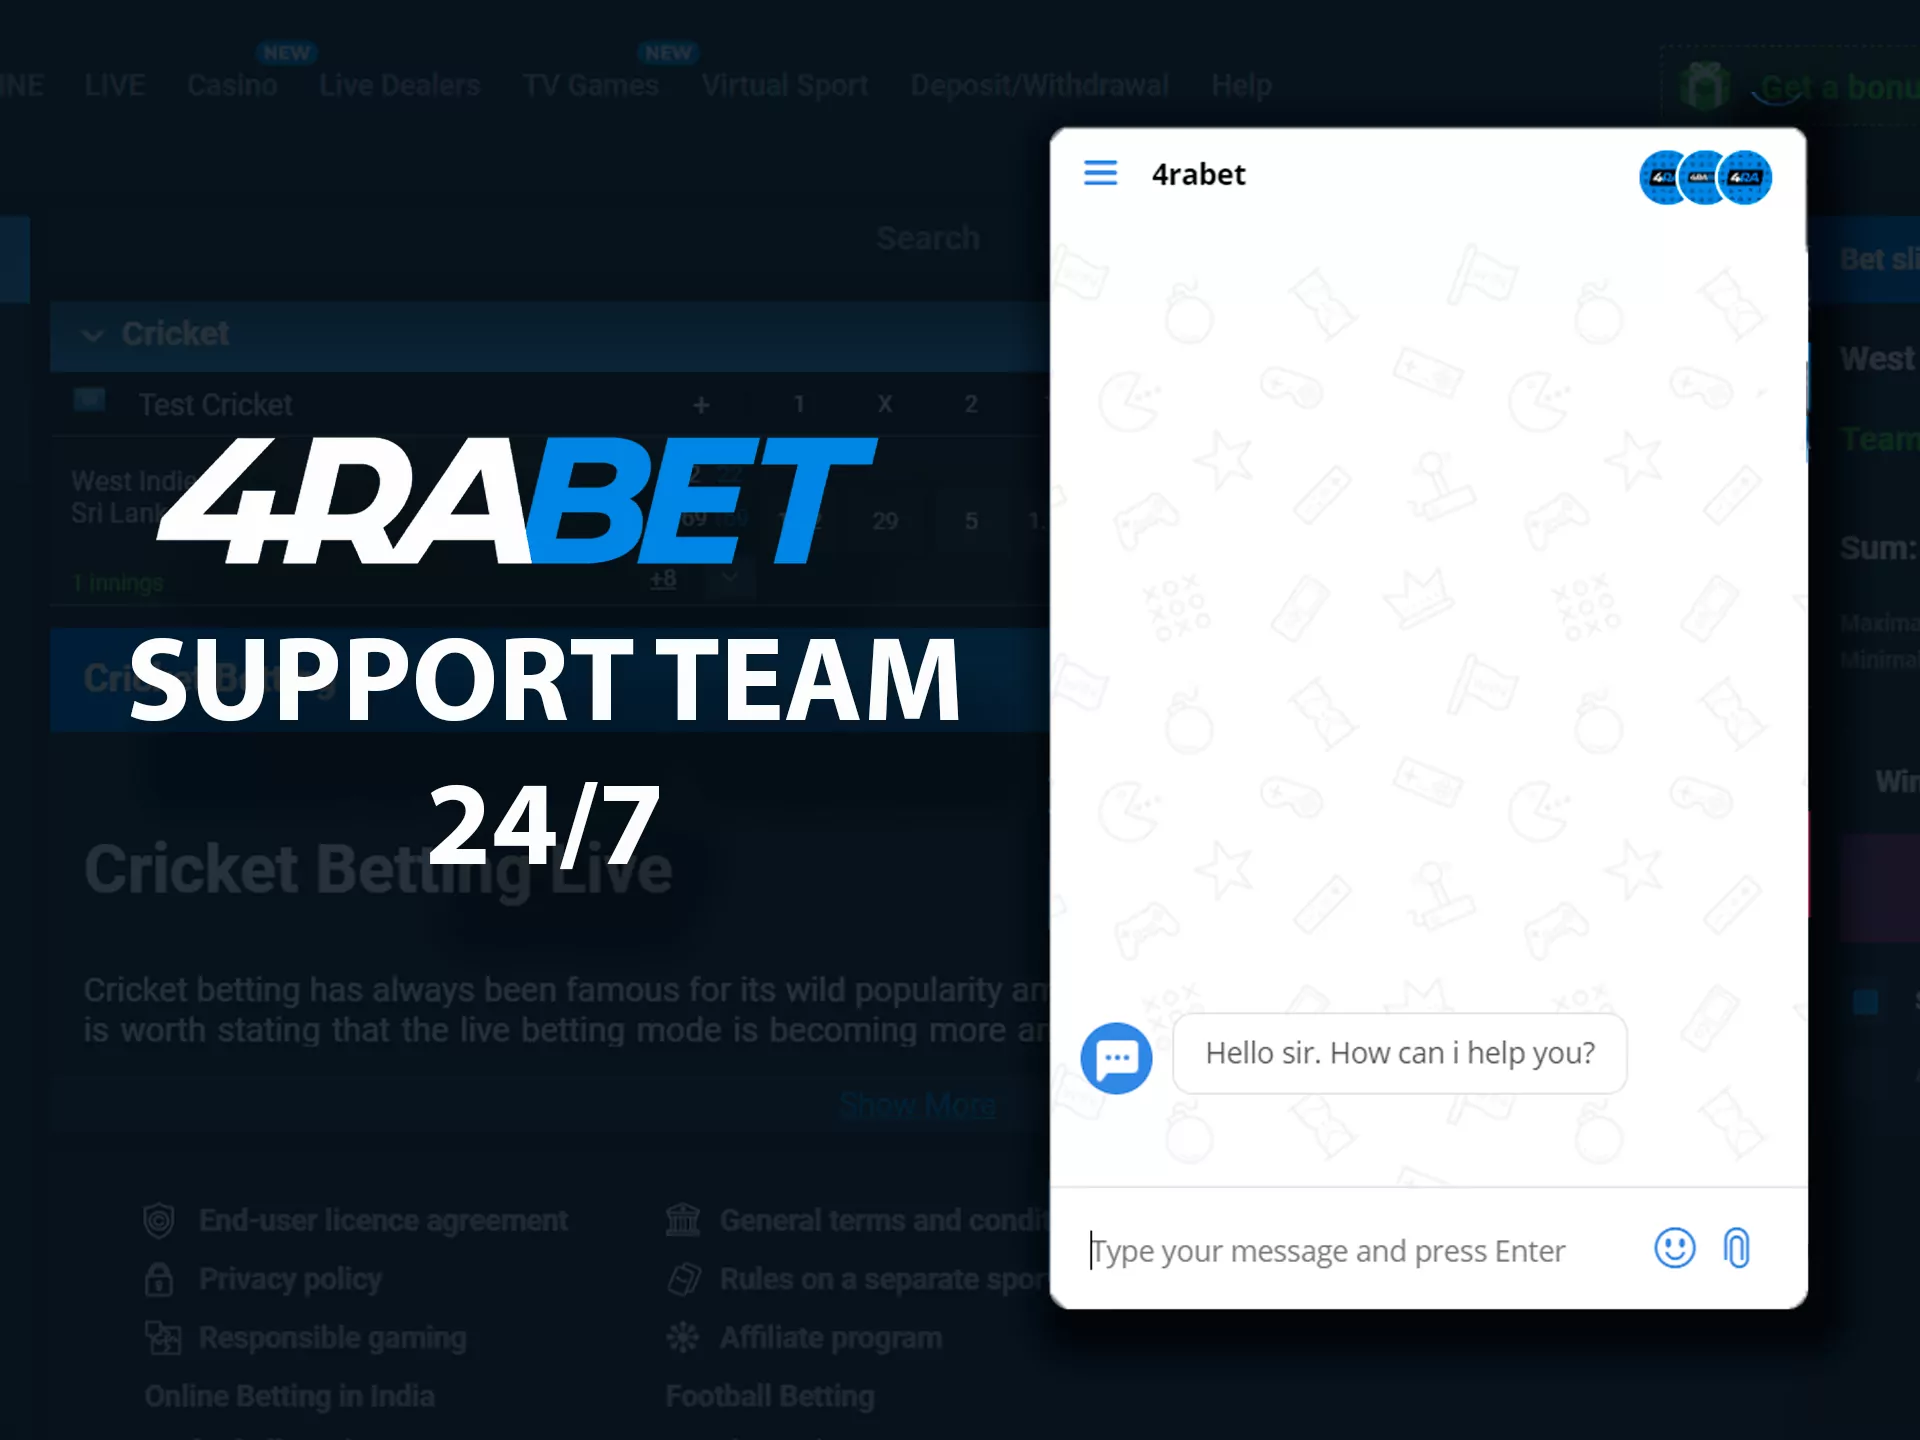 You can contact 4rabet's support team 24/7 every day.